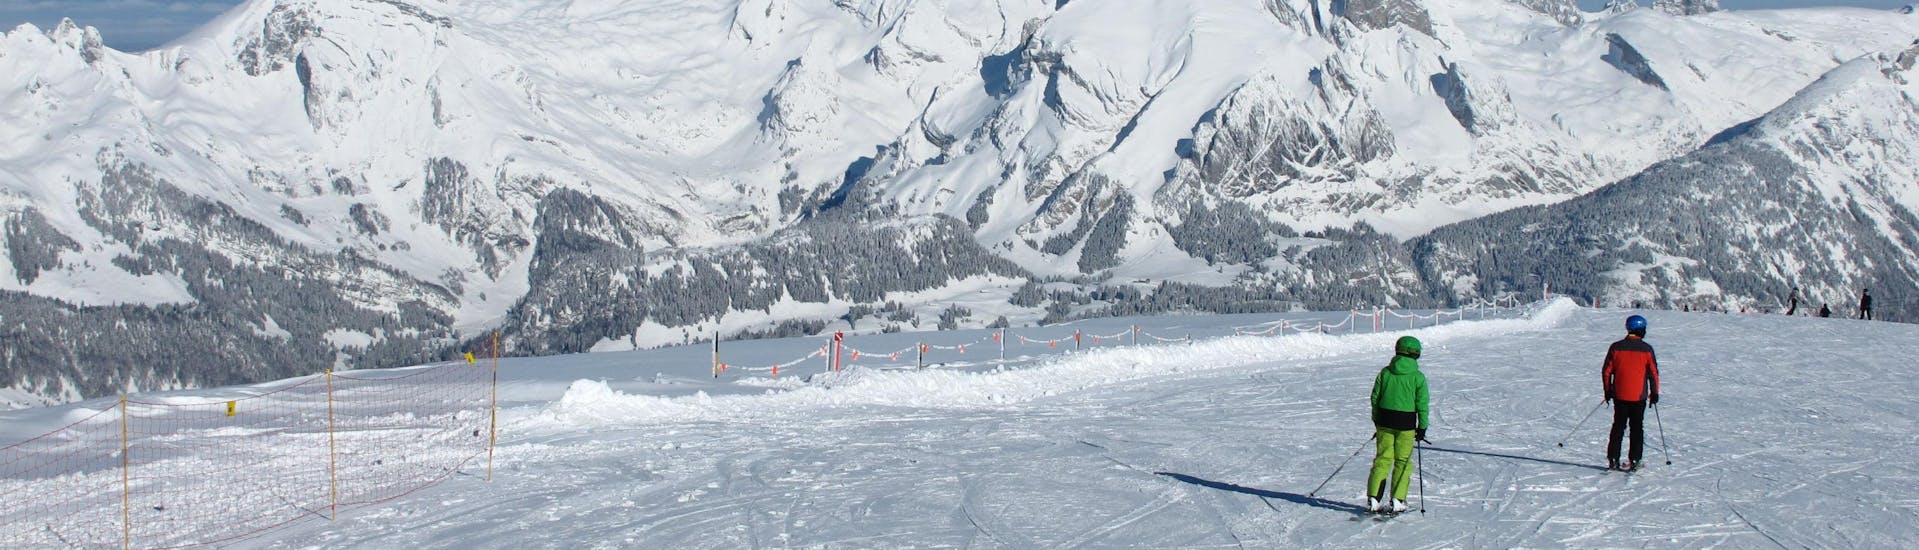 Two skiers are skiing down a freshly prepared ski slope in the ski resort of Alt St. Johann, where visitors can book ski lessons with the local ski schools.